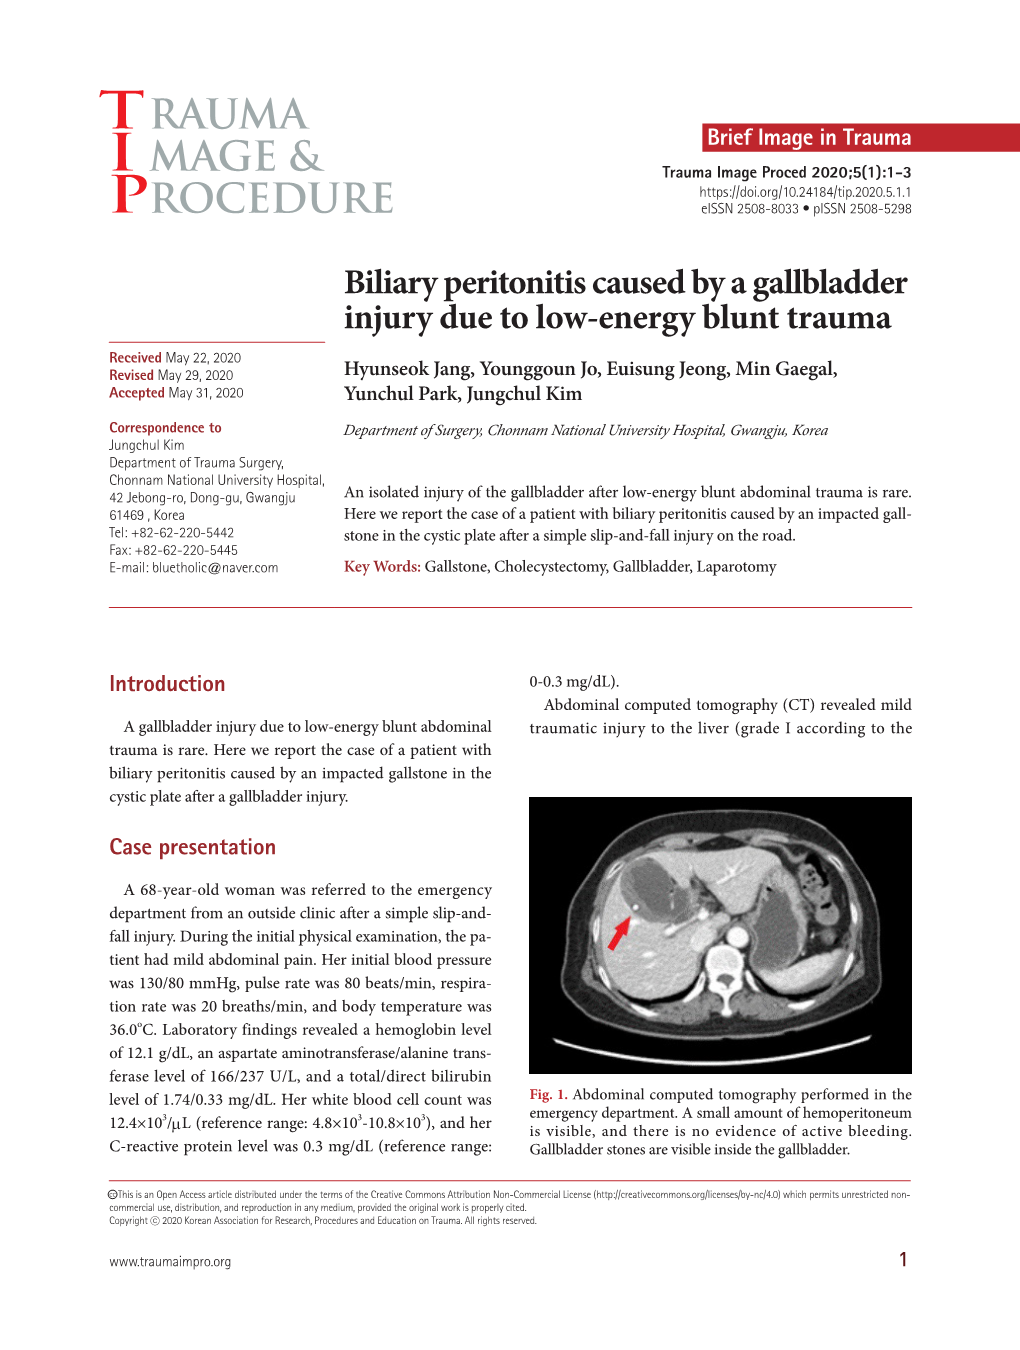 Biliary Peritonitis Caused by a Gallbladder Injury Due to Low